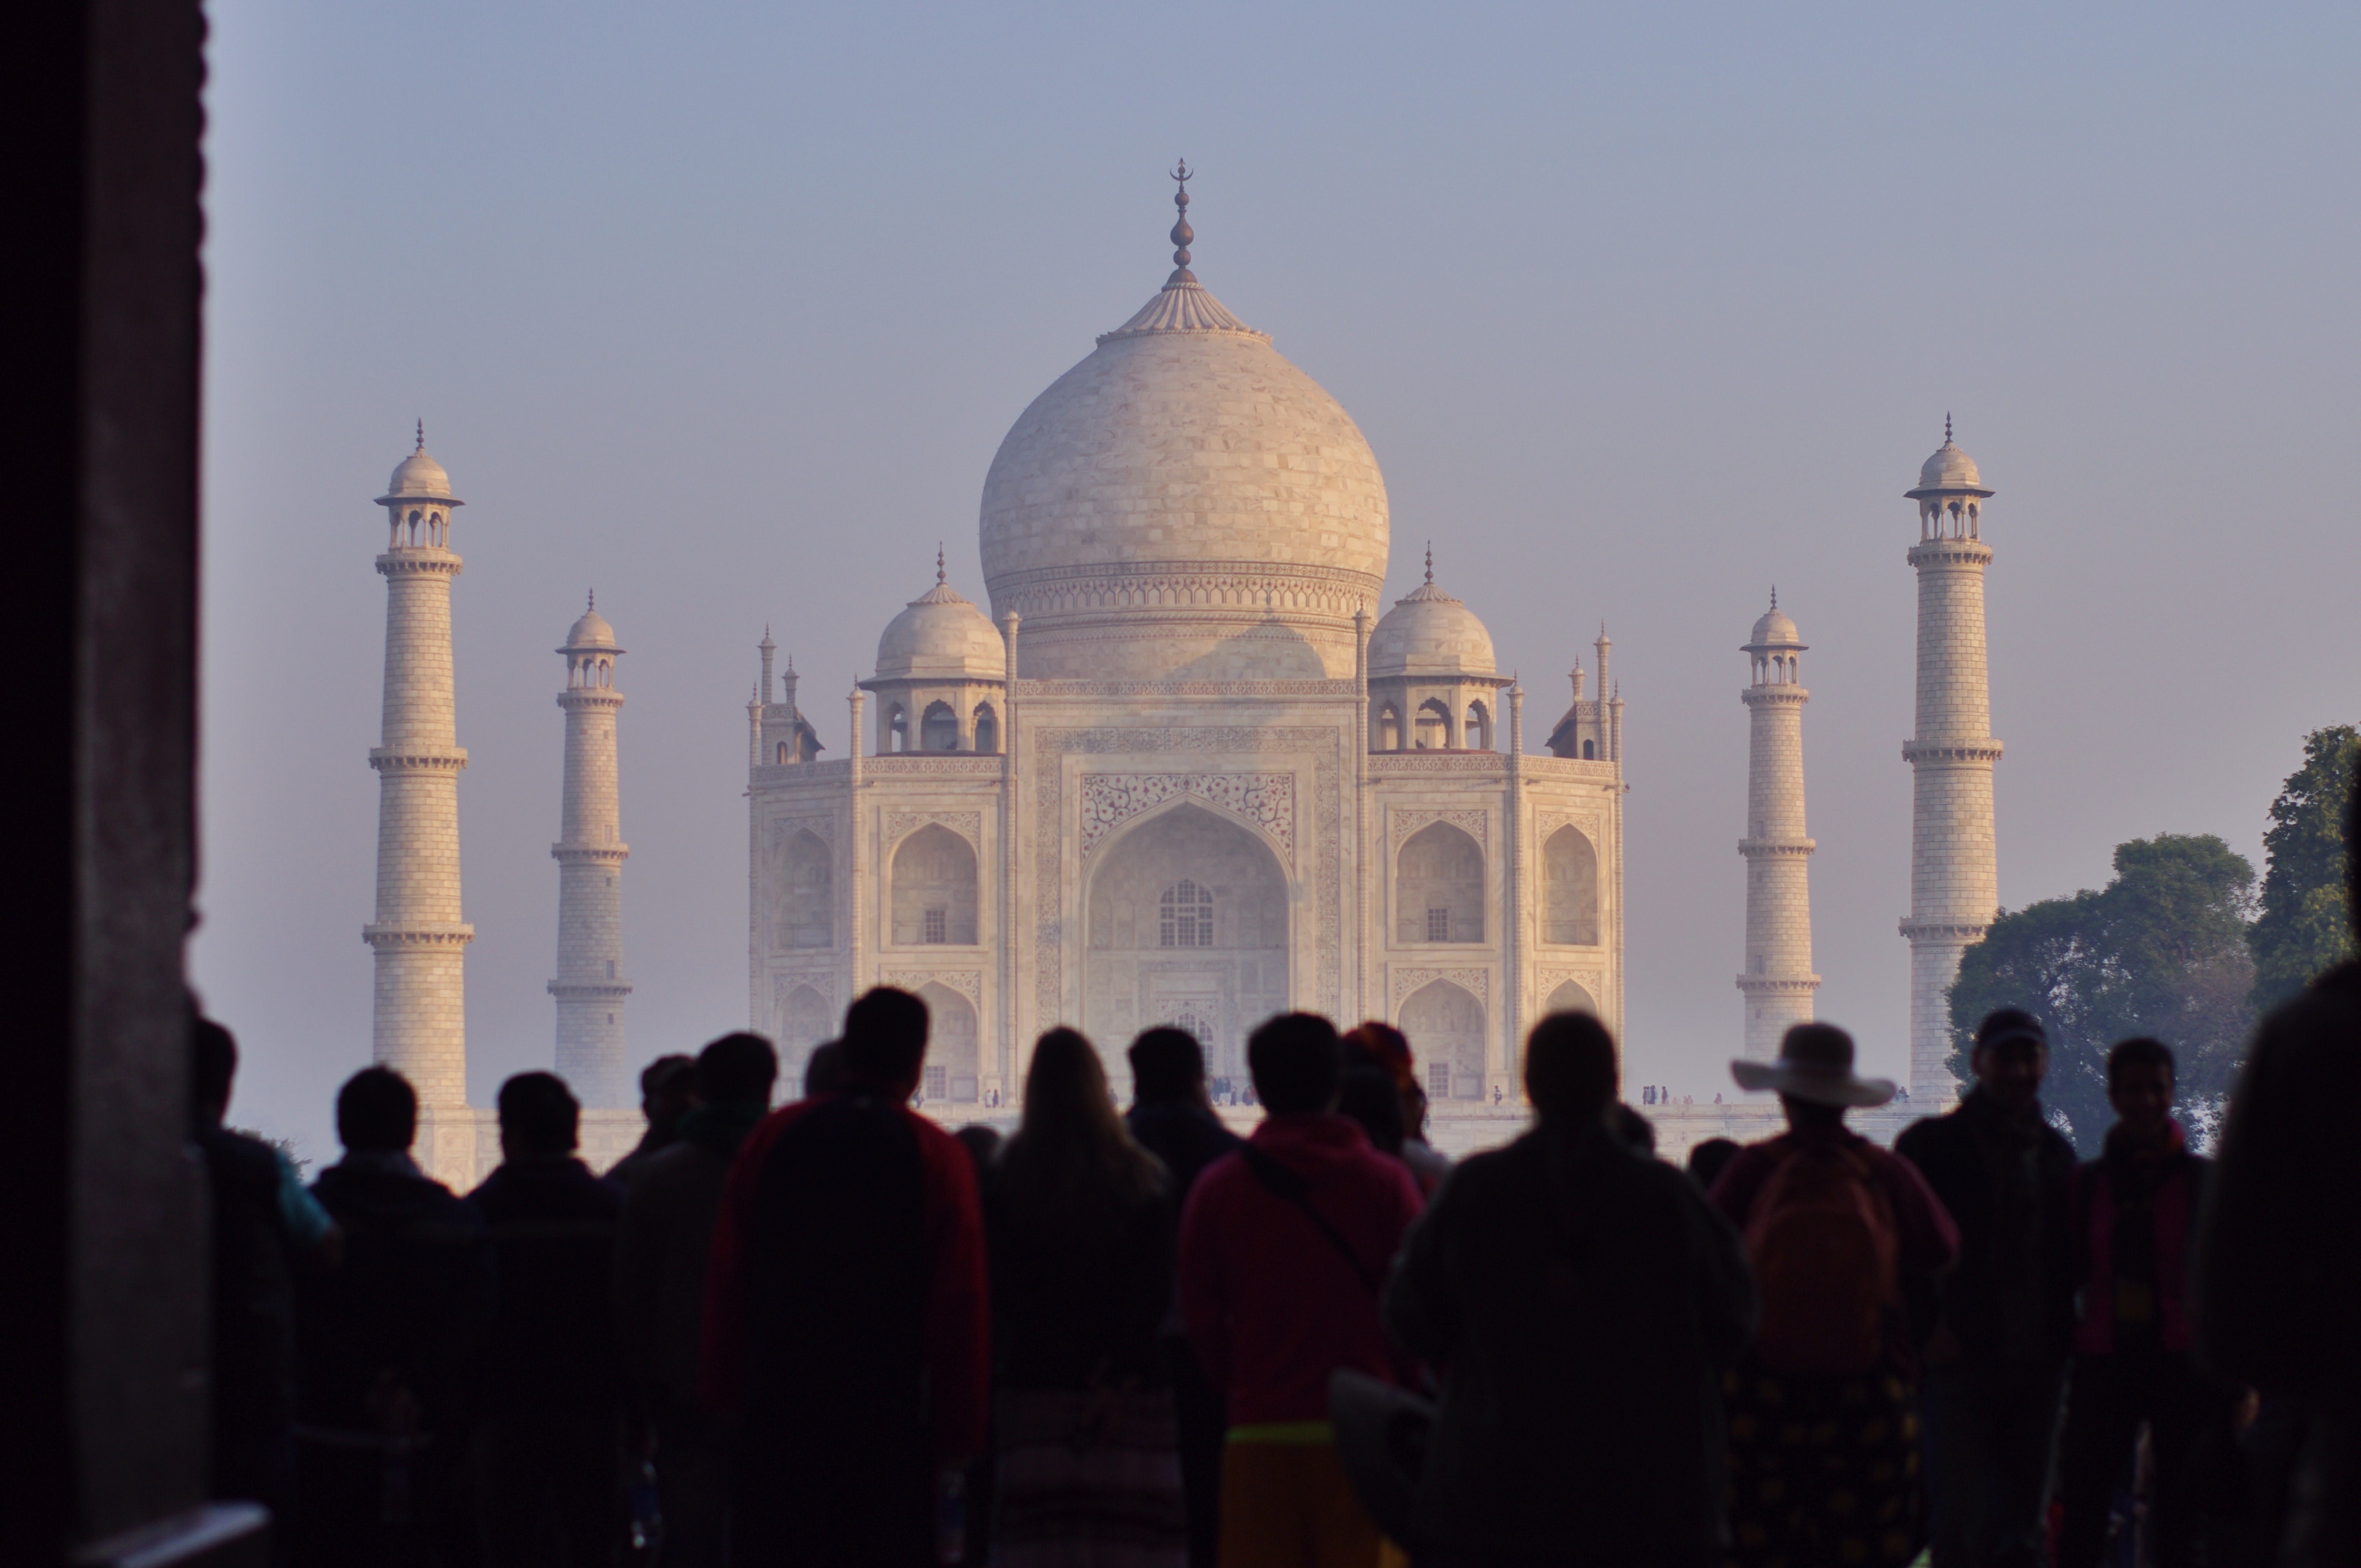 AGRA: THE HOMETOWN OF MUGHAL ARCHITECTURE